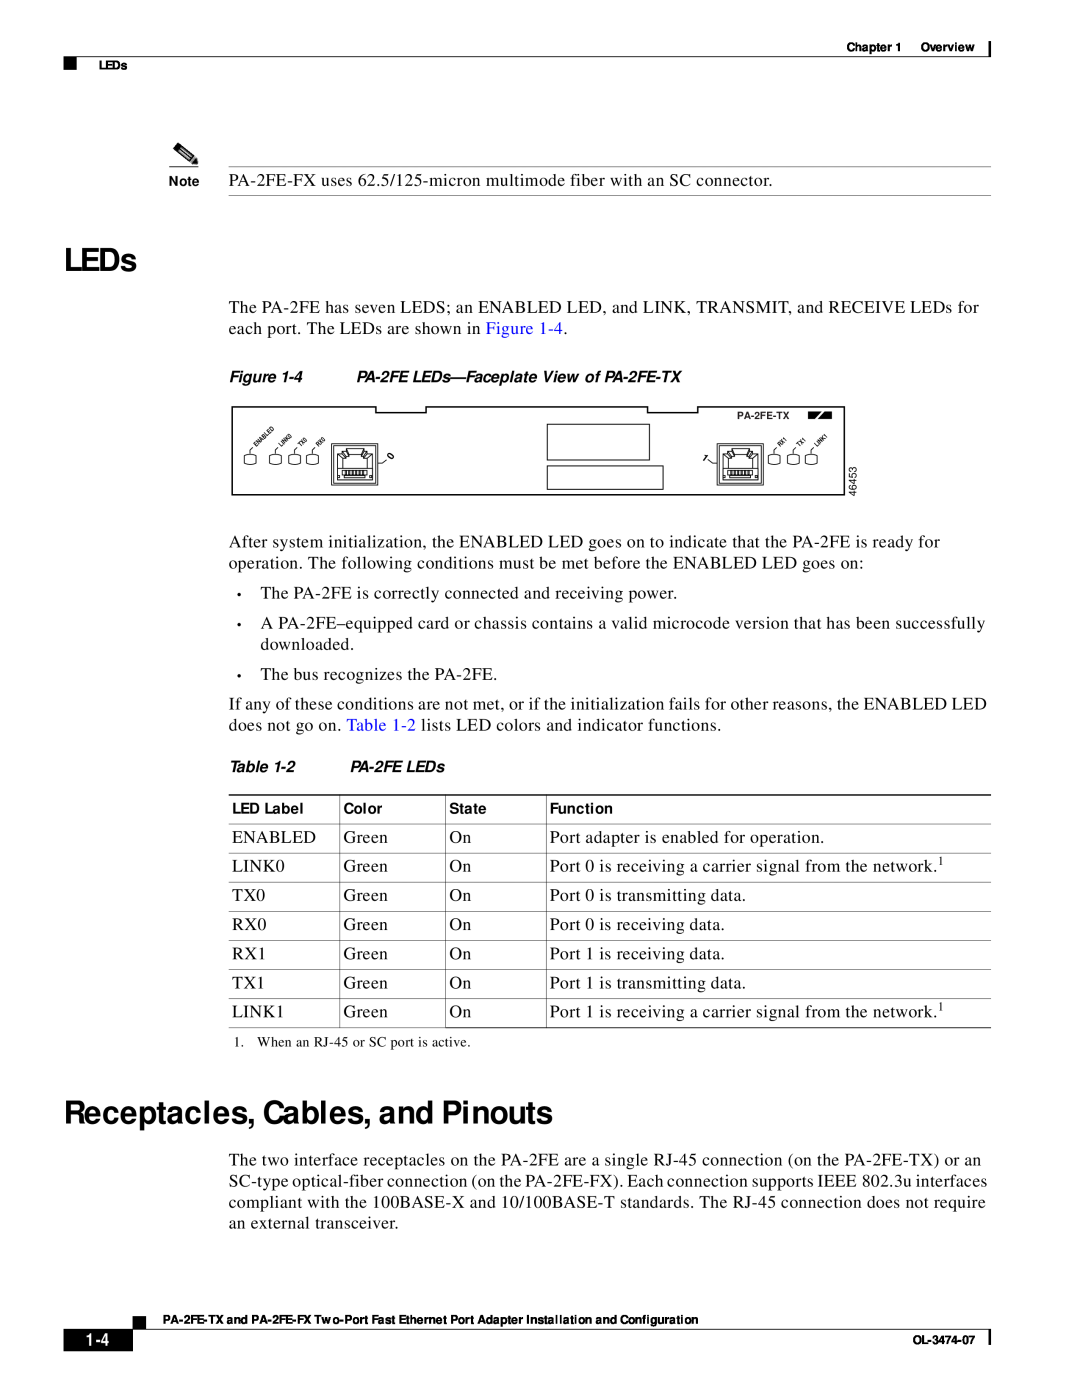 Cisco Systems PA-2FE-TX, PA-2FE-FX manual LEDs, Receptacles, Cables, and Pinouts, LED Label, Color, State, Function 